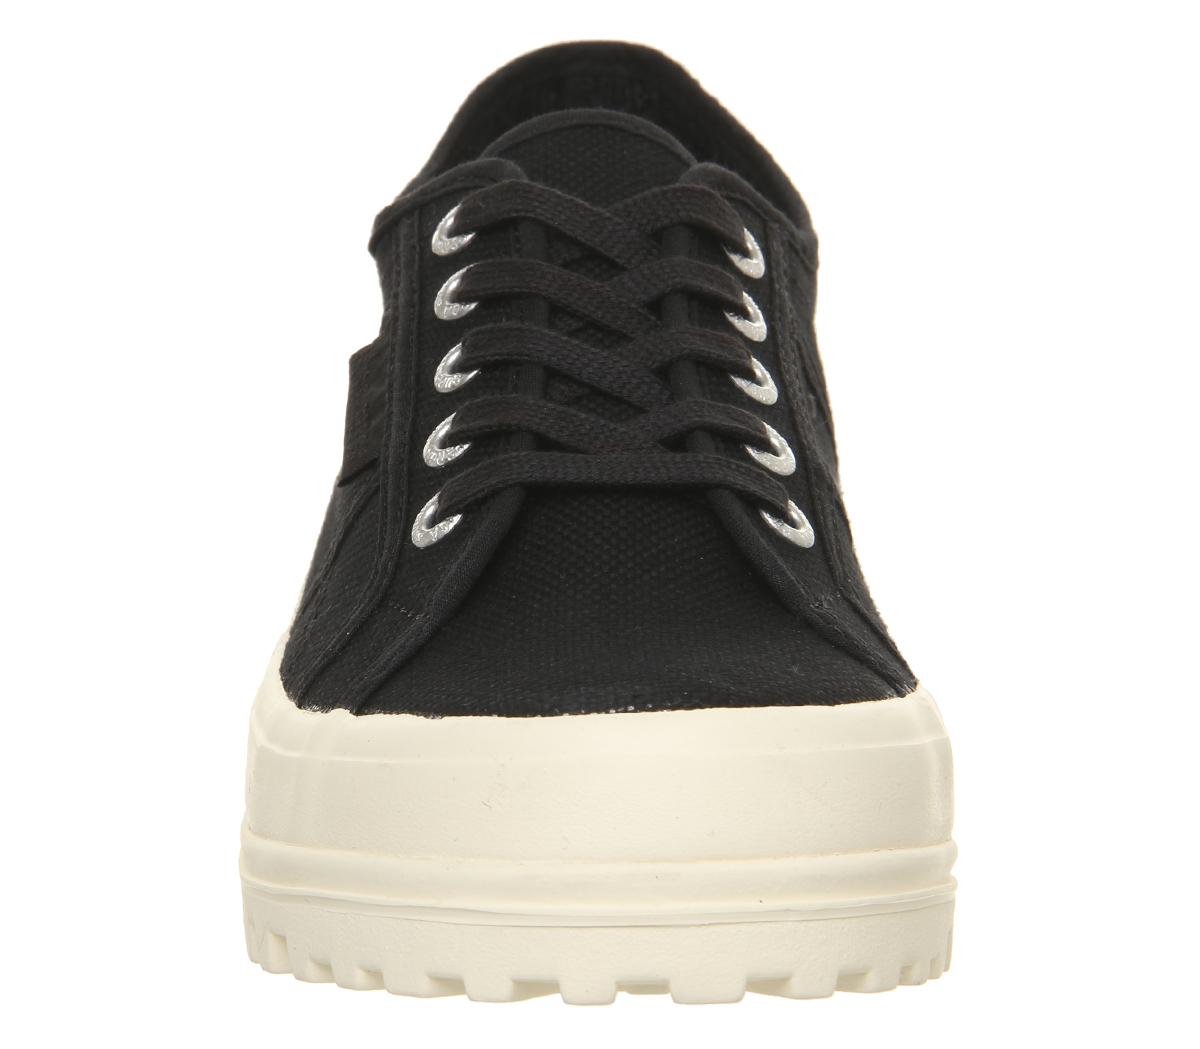 Superga 2555 Trainers Black Off White Exclusive - Hers trainers